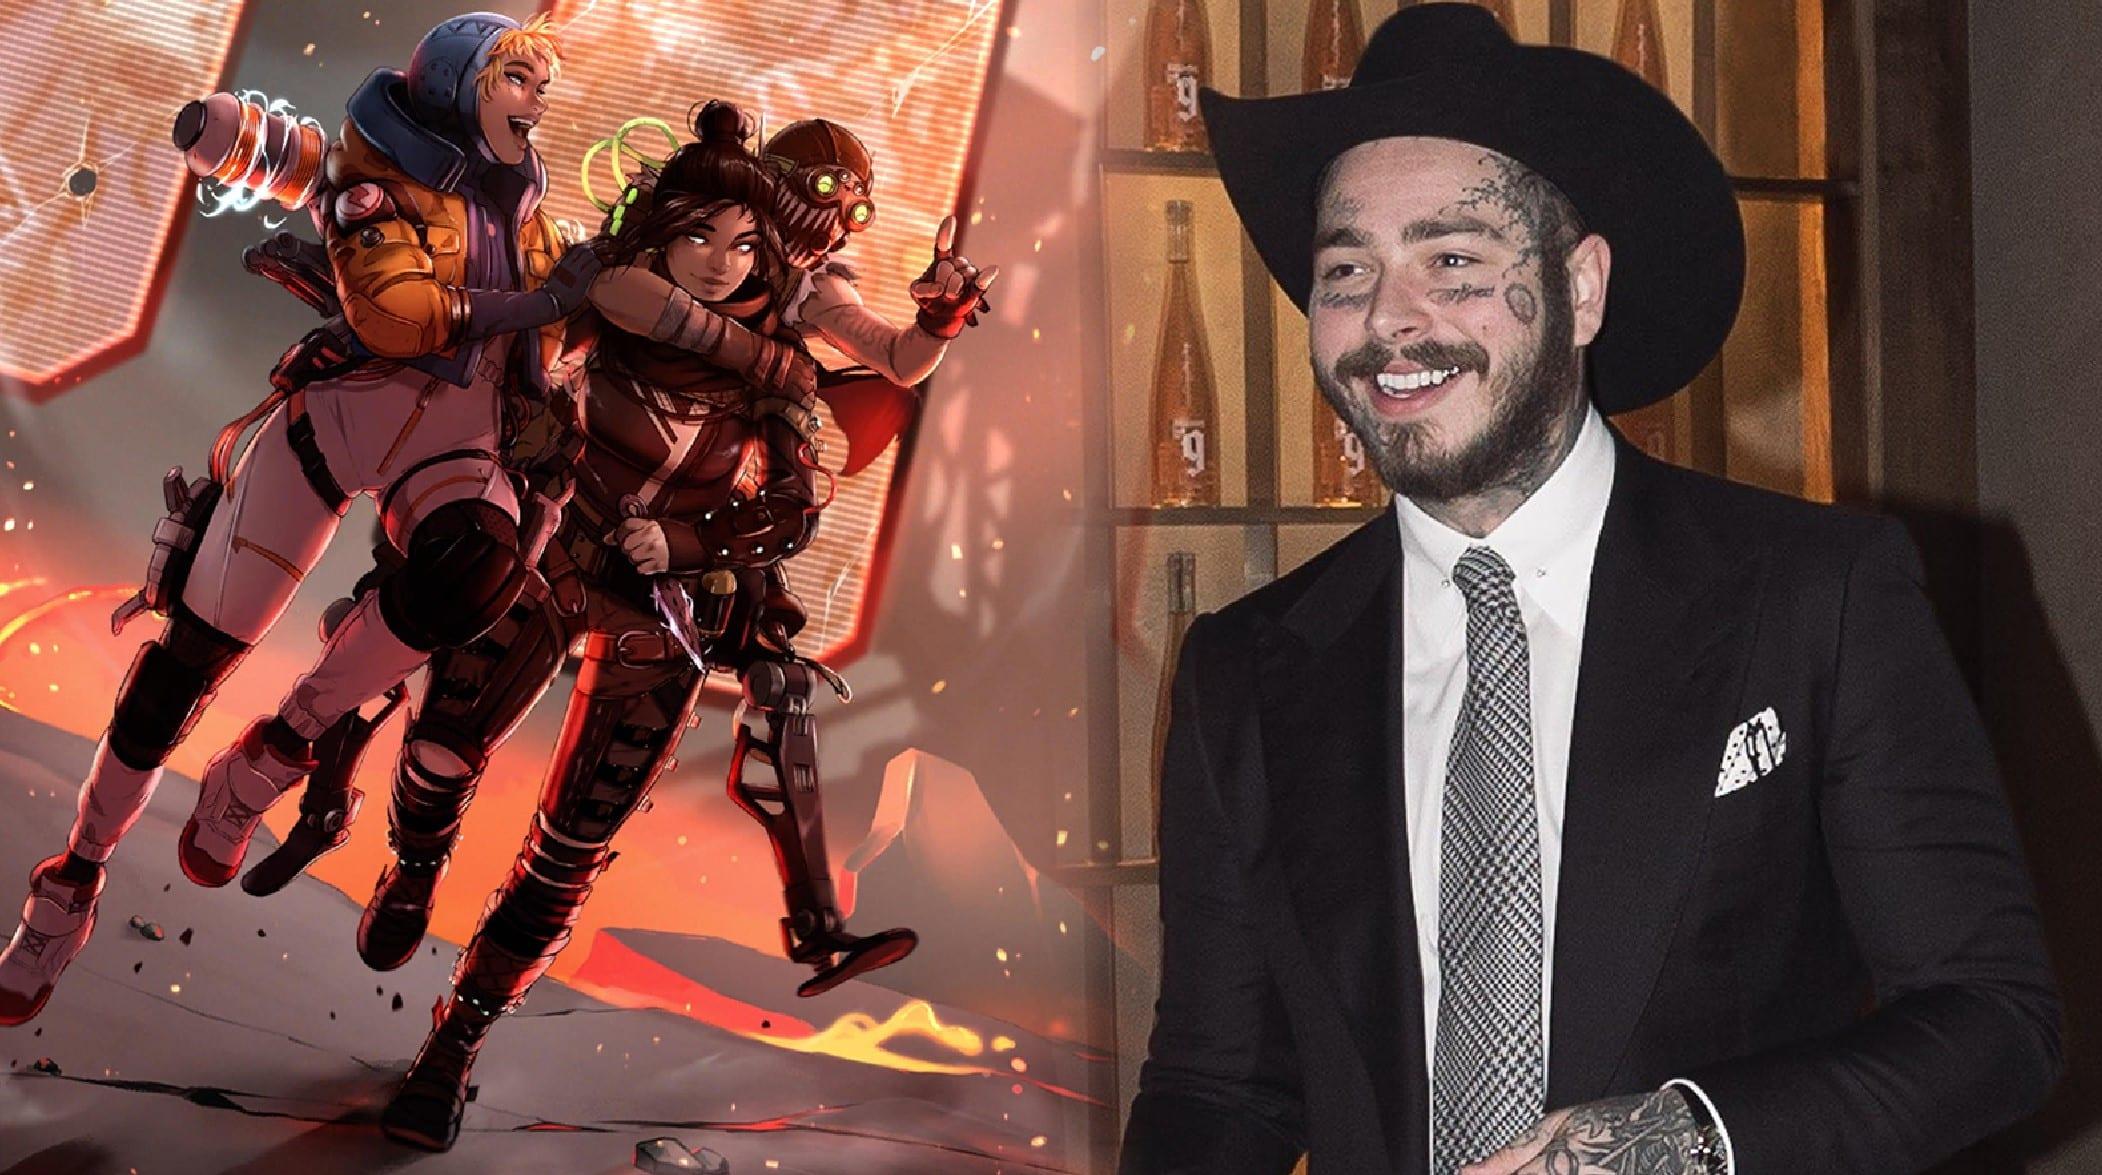 Post Malone next to Apex Legends gameplay